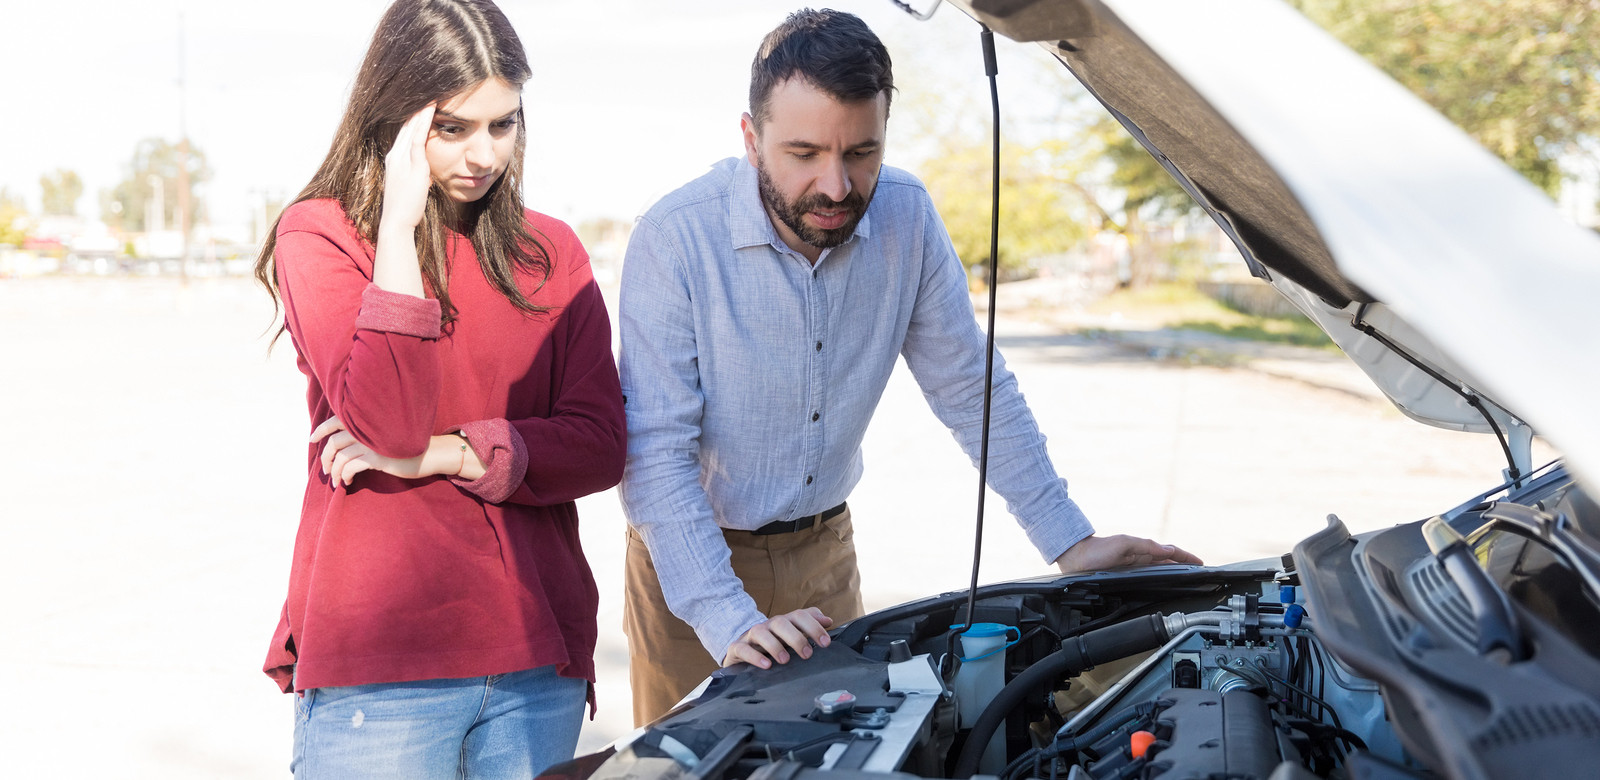 Worried-looking lady and bearded man staring at car engine